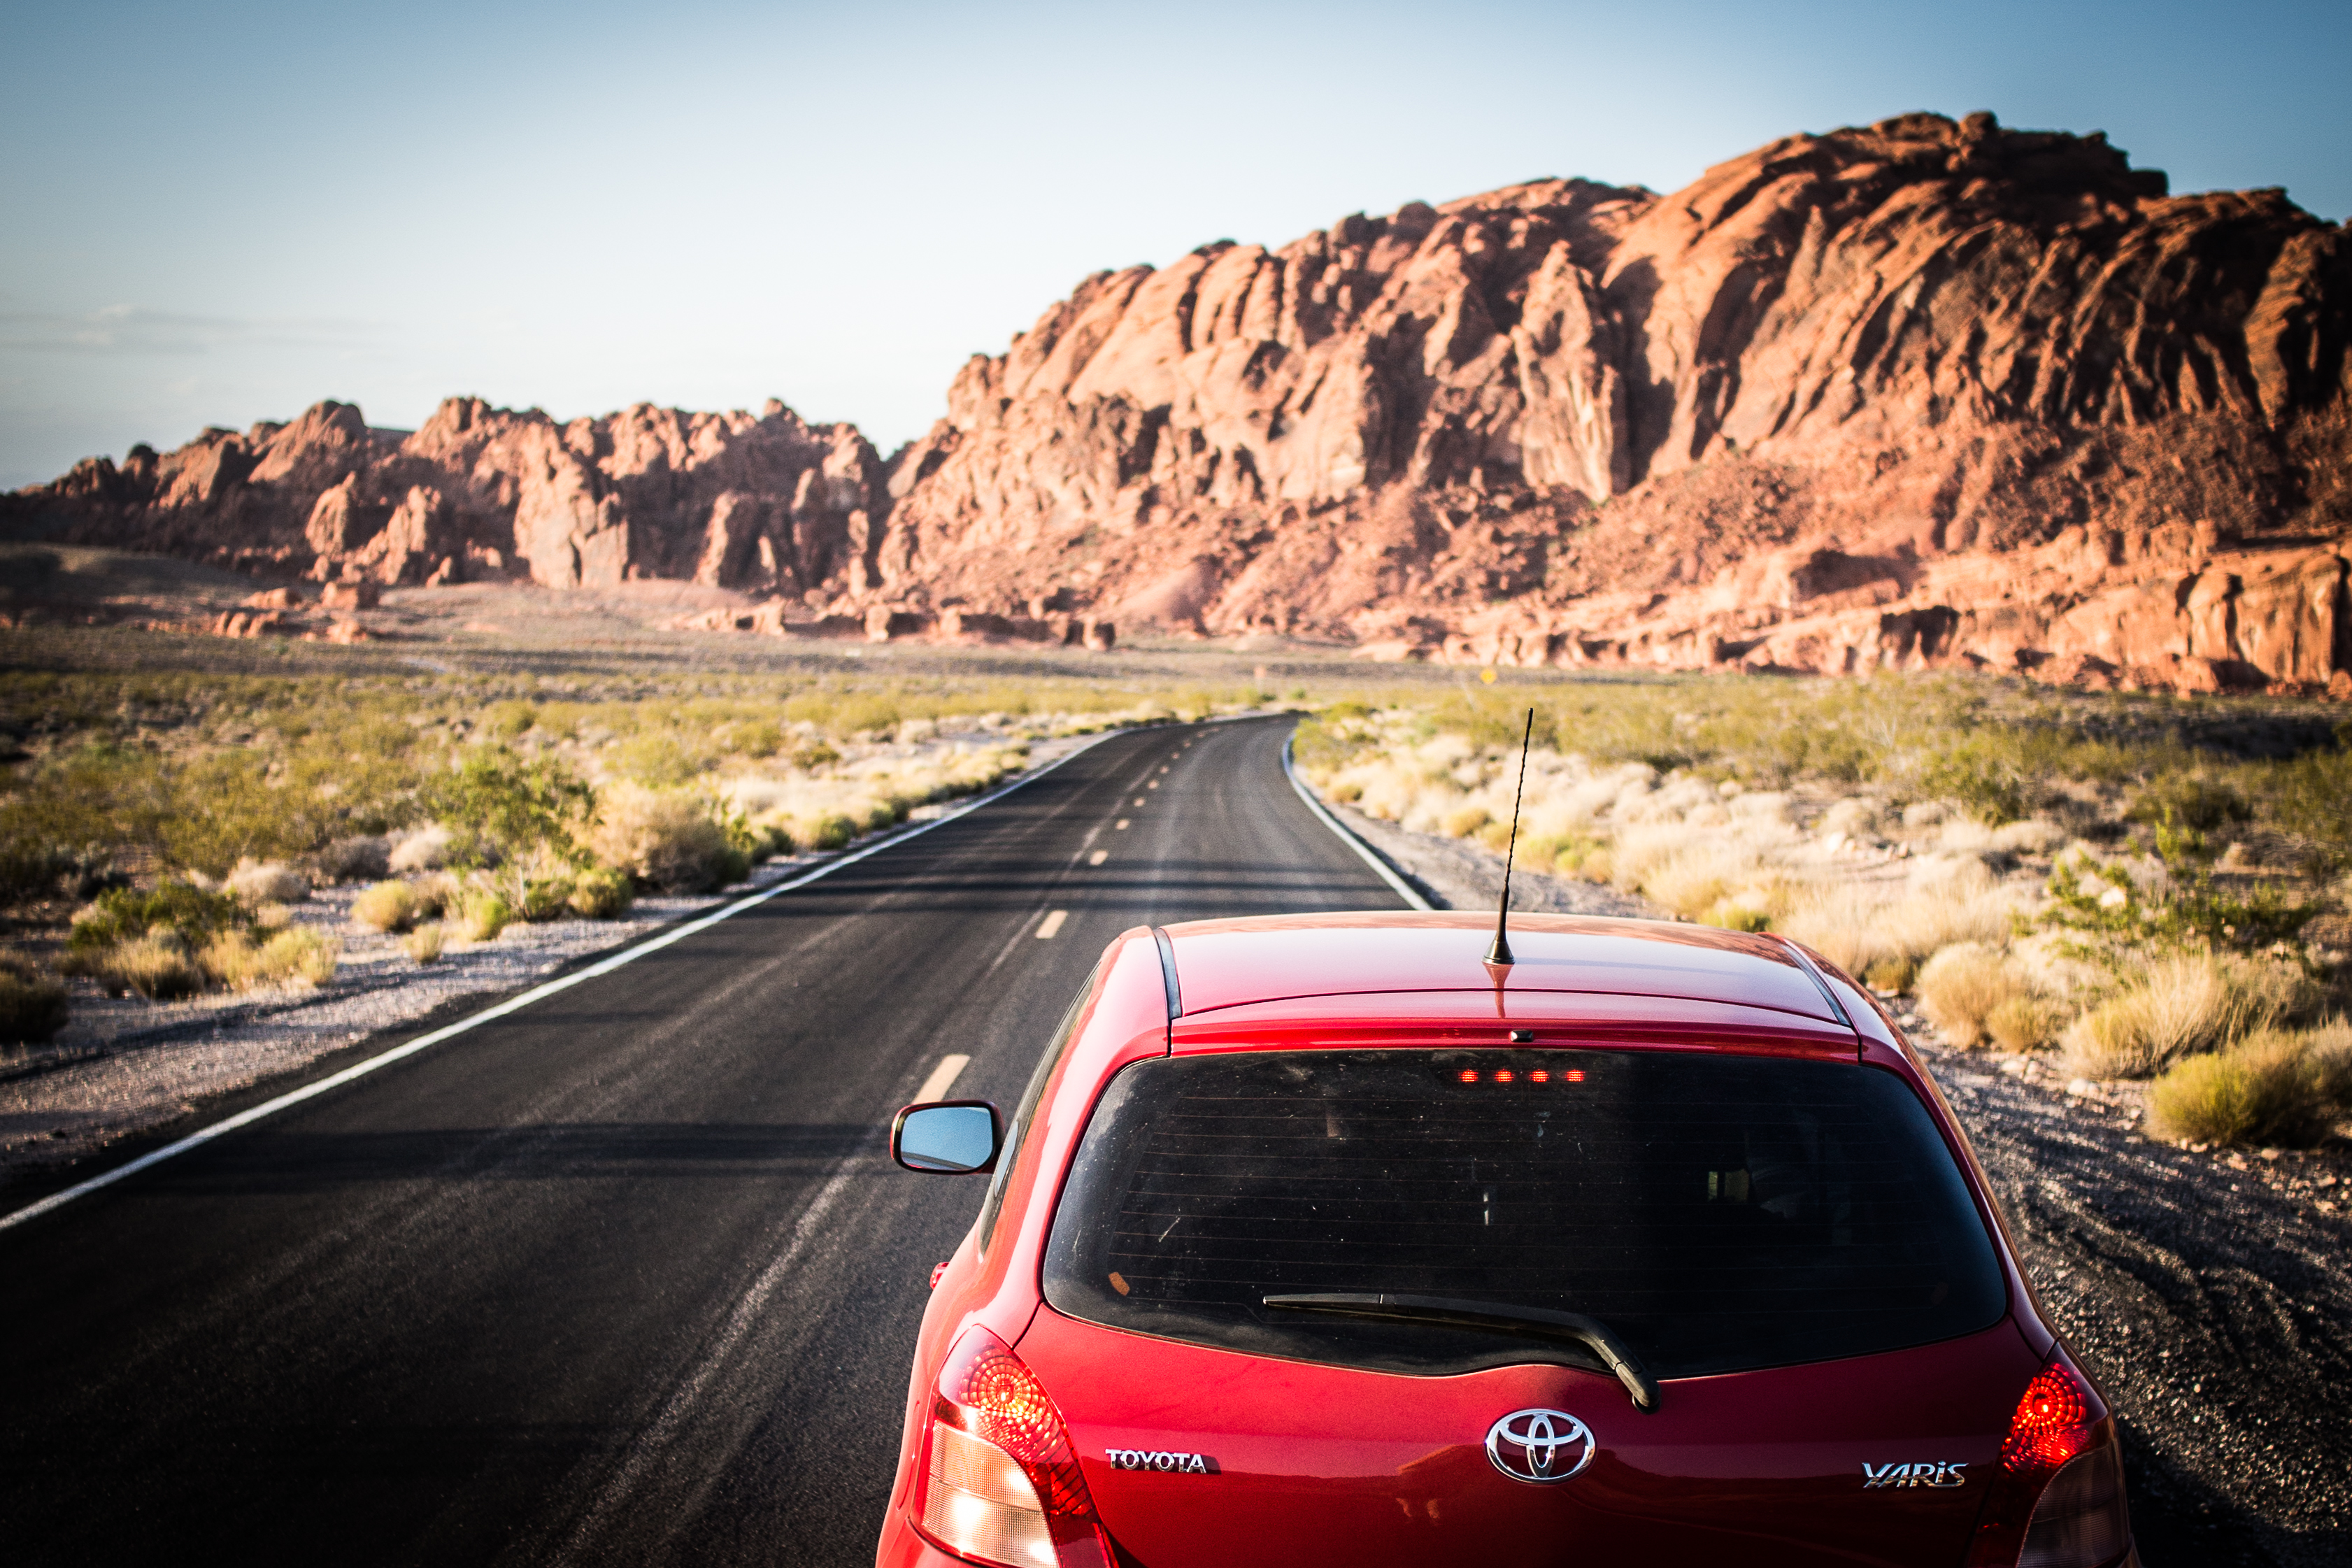 Yaris at Valley of Fire State Park, Nevada, USA